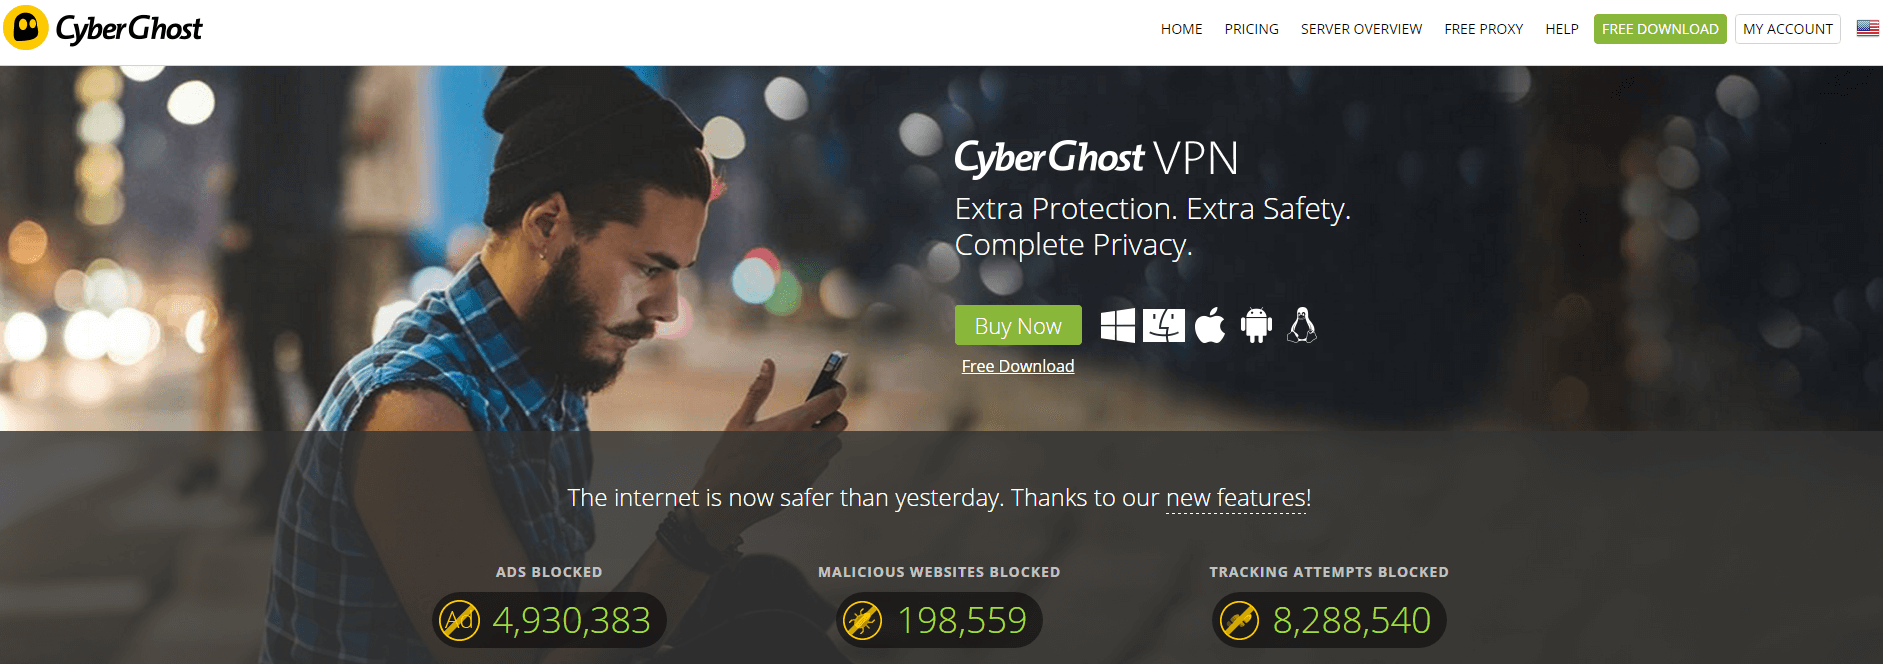 cyberghost vpn review ign